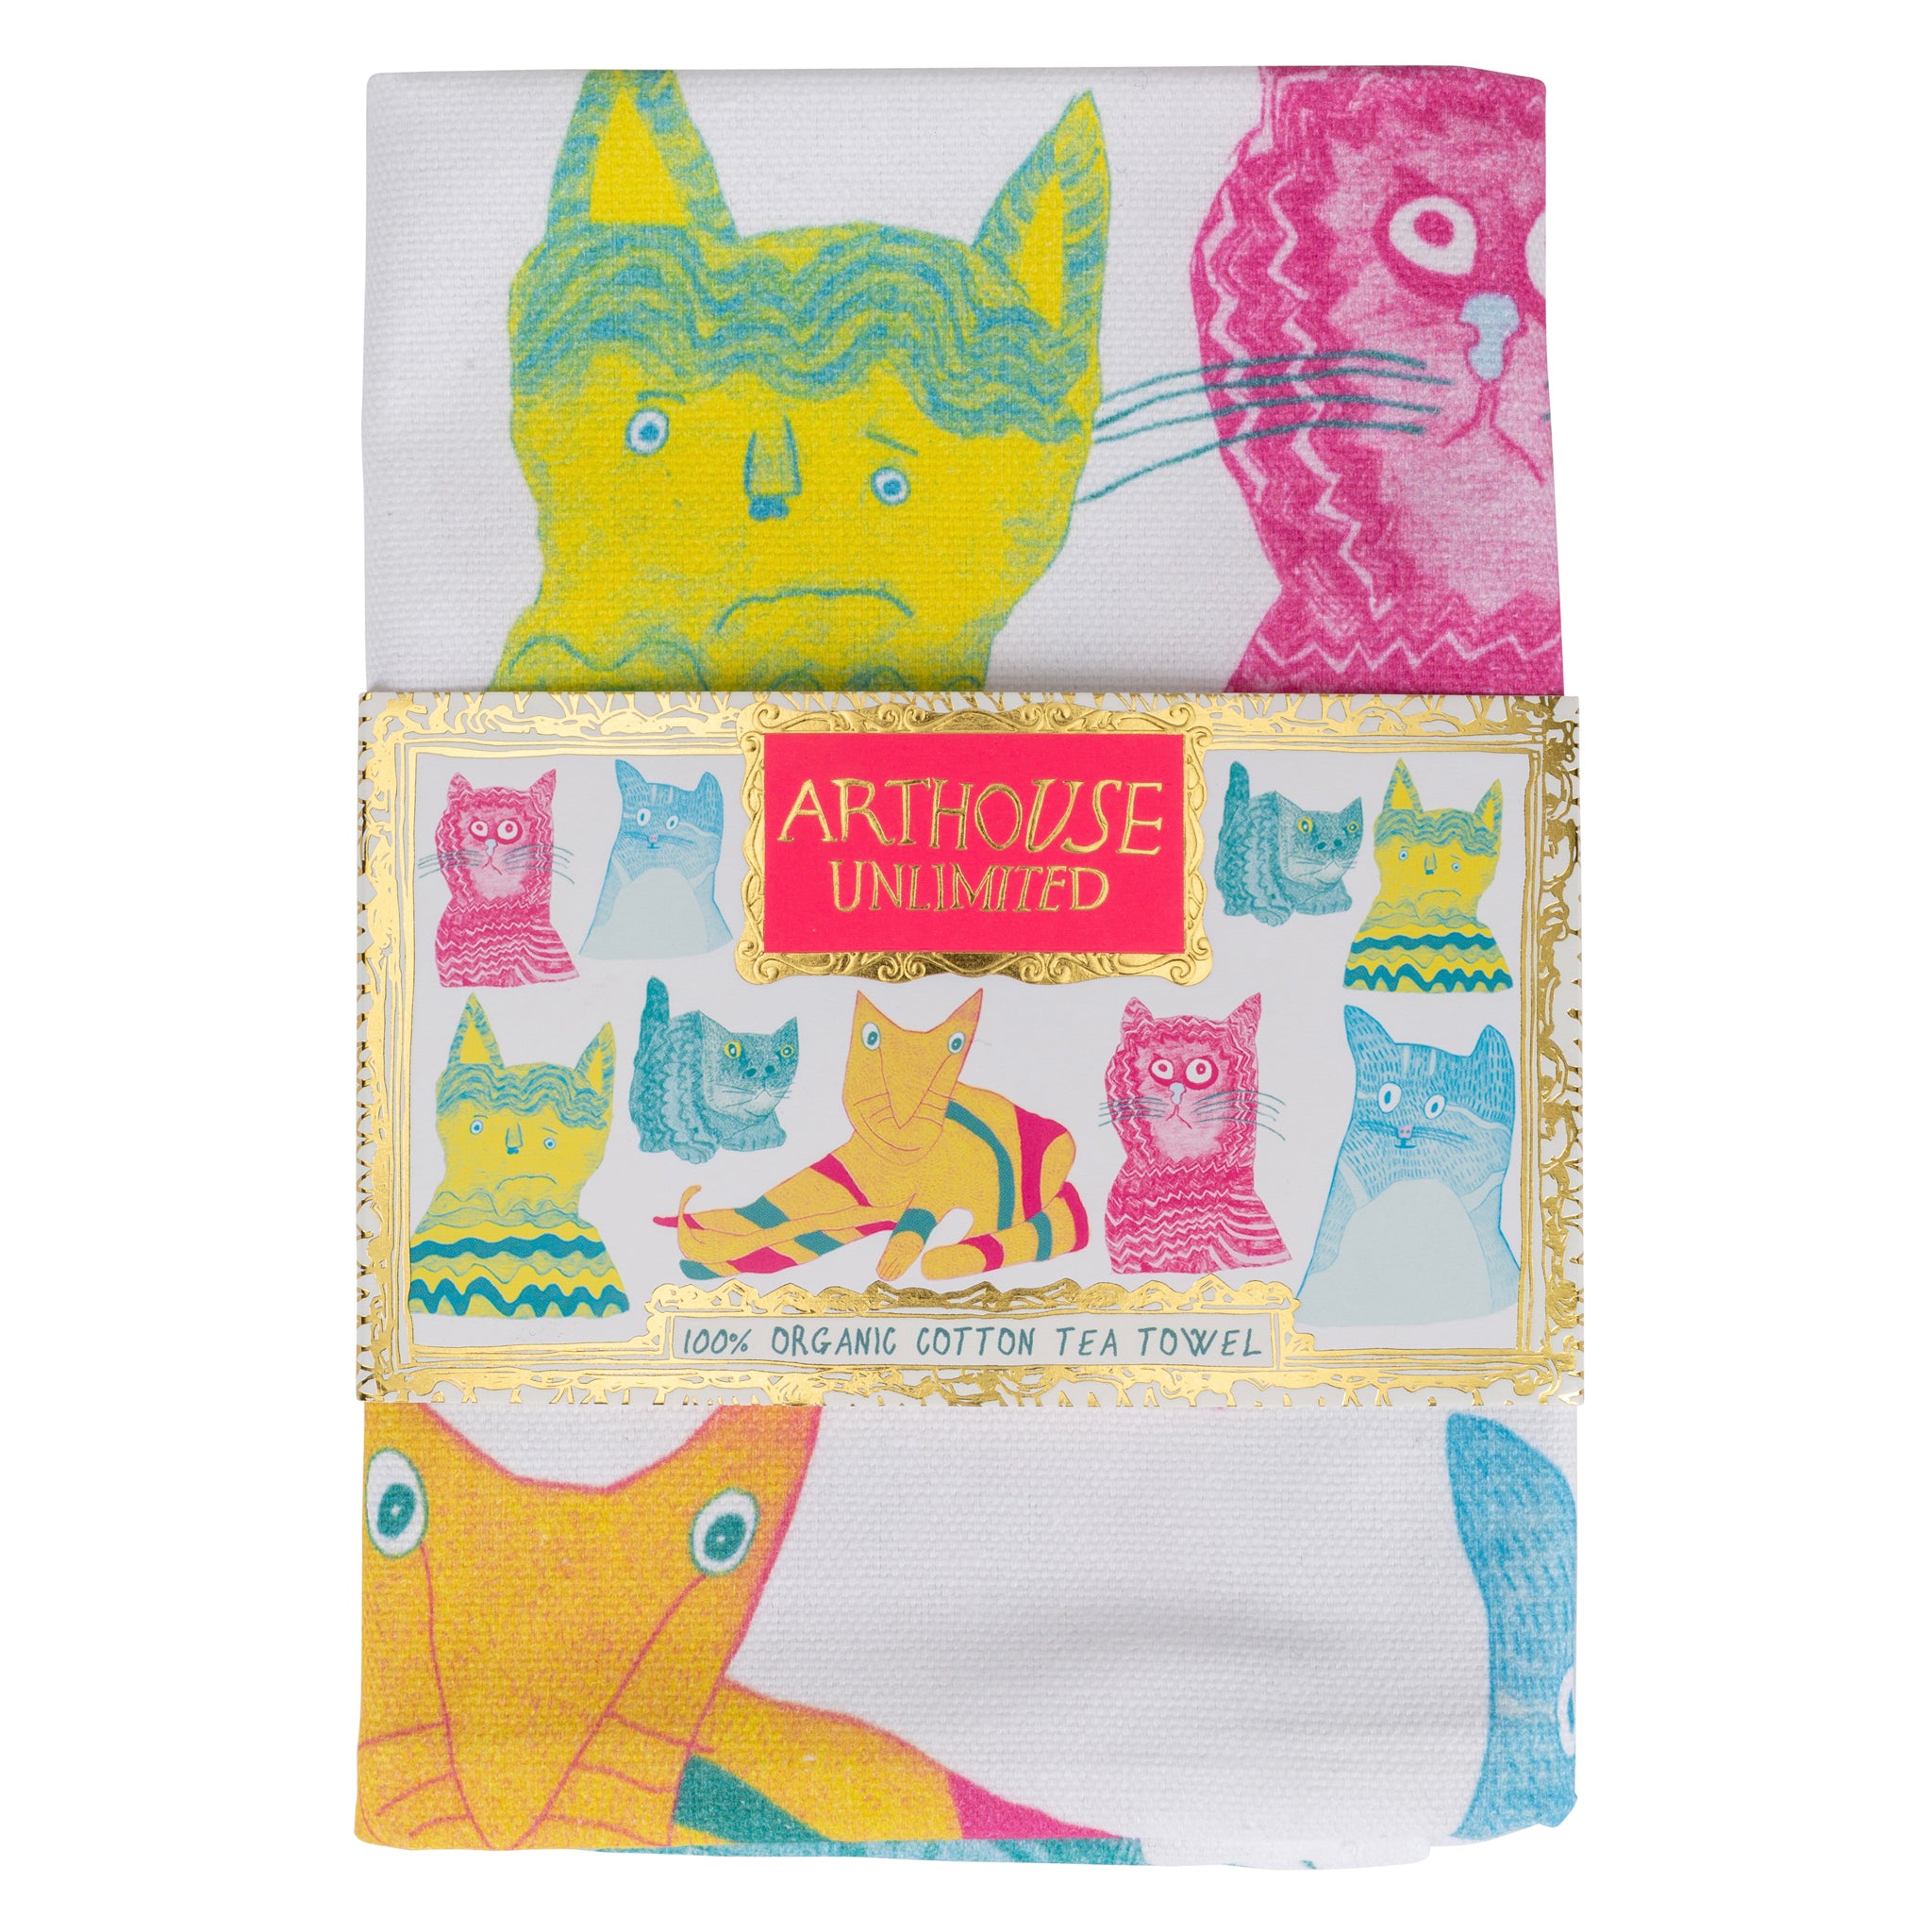 Bright coloured Miaow for Now, 100% Organic Cotton Tea Towel with arthouse unlimited belly band 